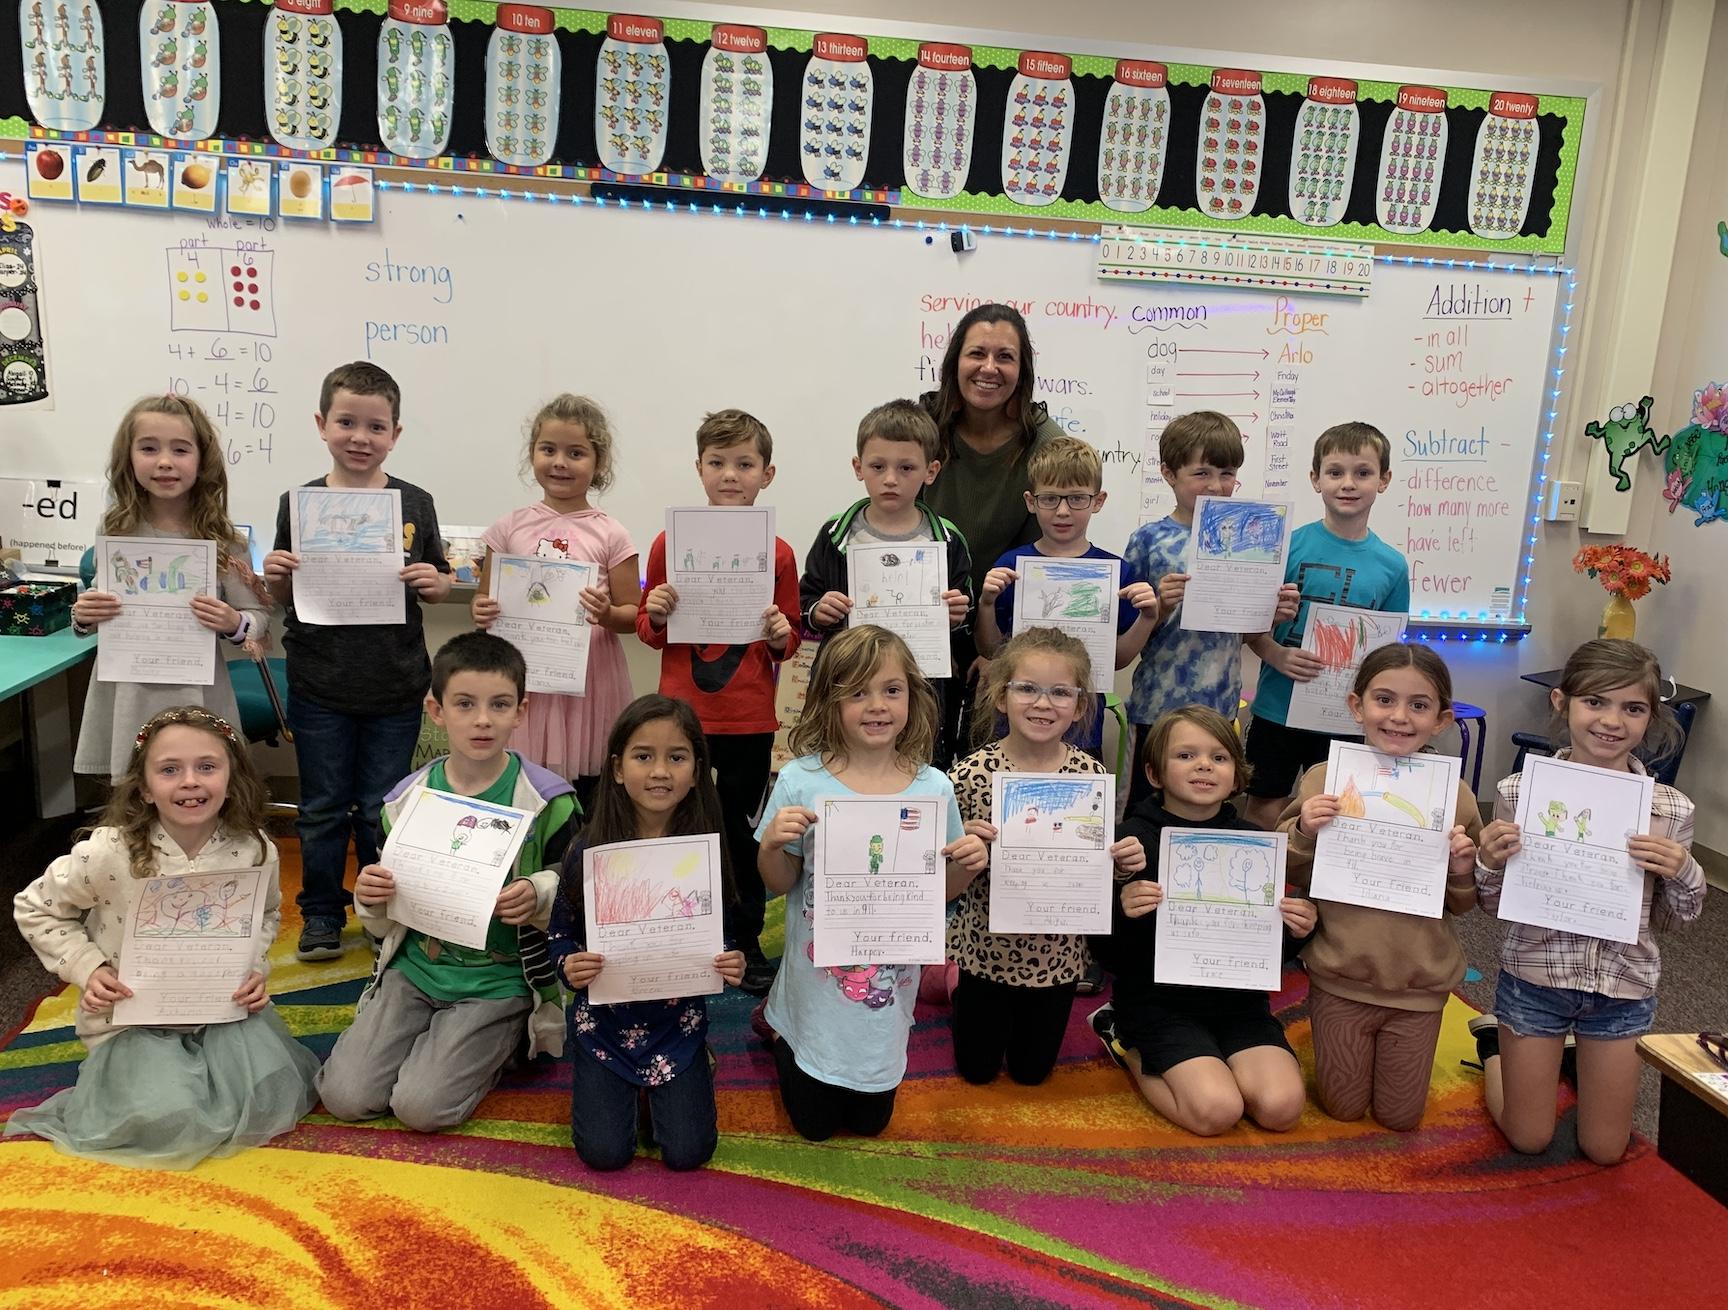 Mrs. Shaffer’s class with their letters to veterans